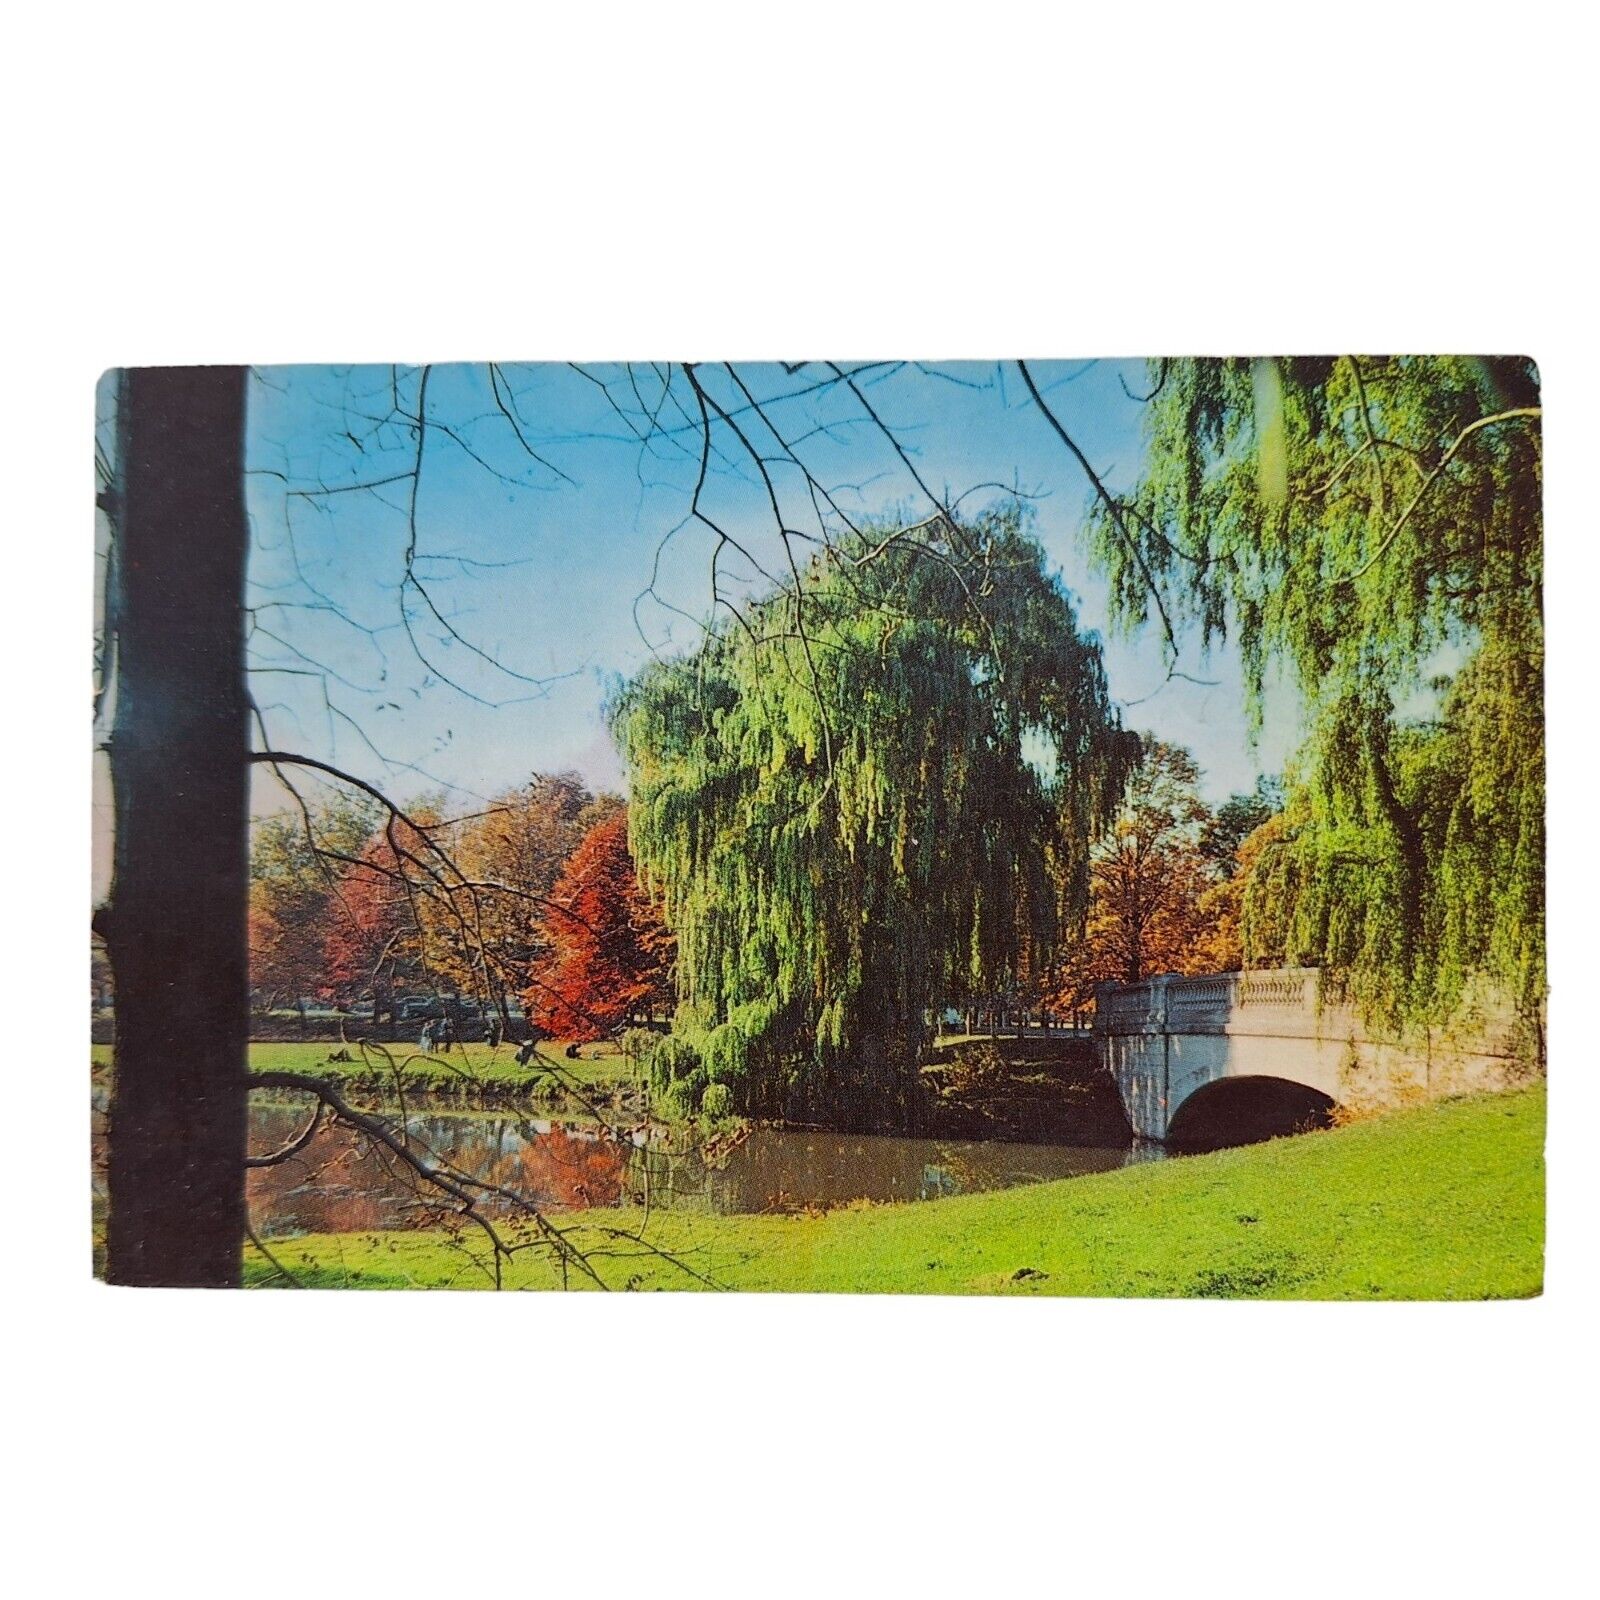 Postcard Genesee Valley Park Rochester New York Chrome Posted